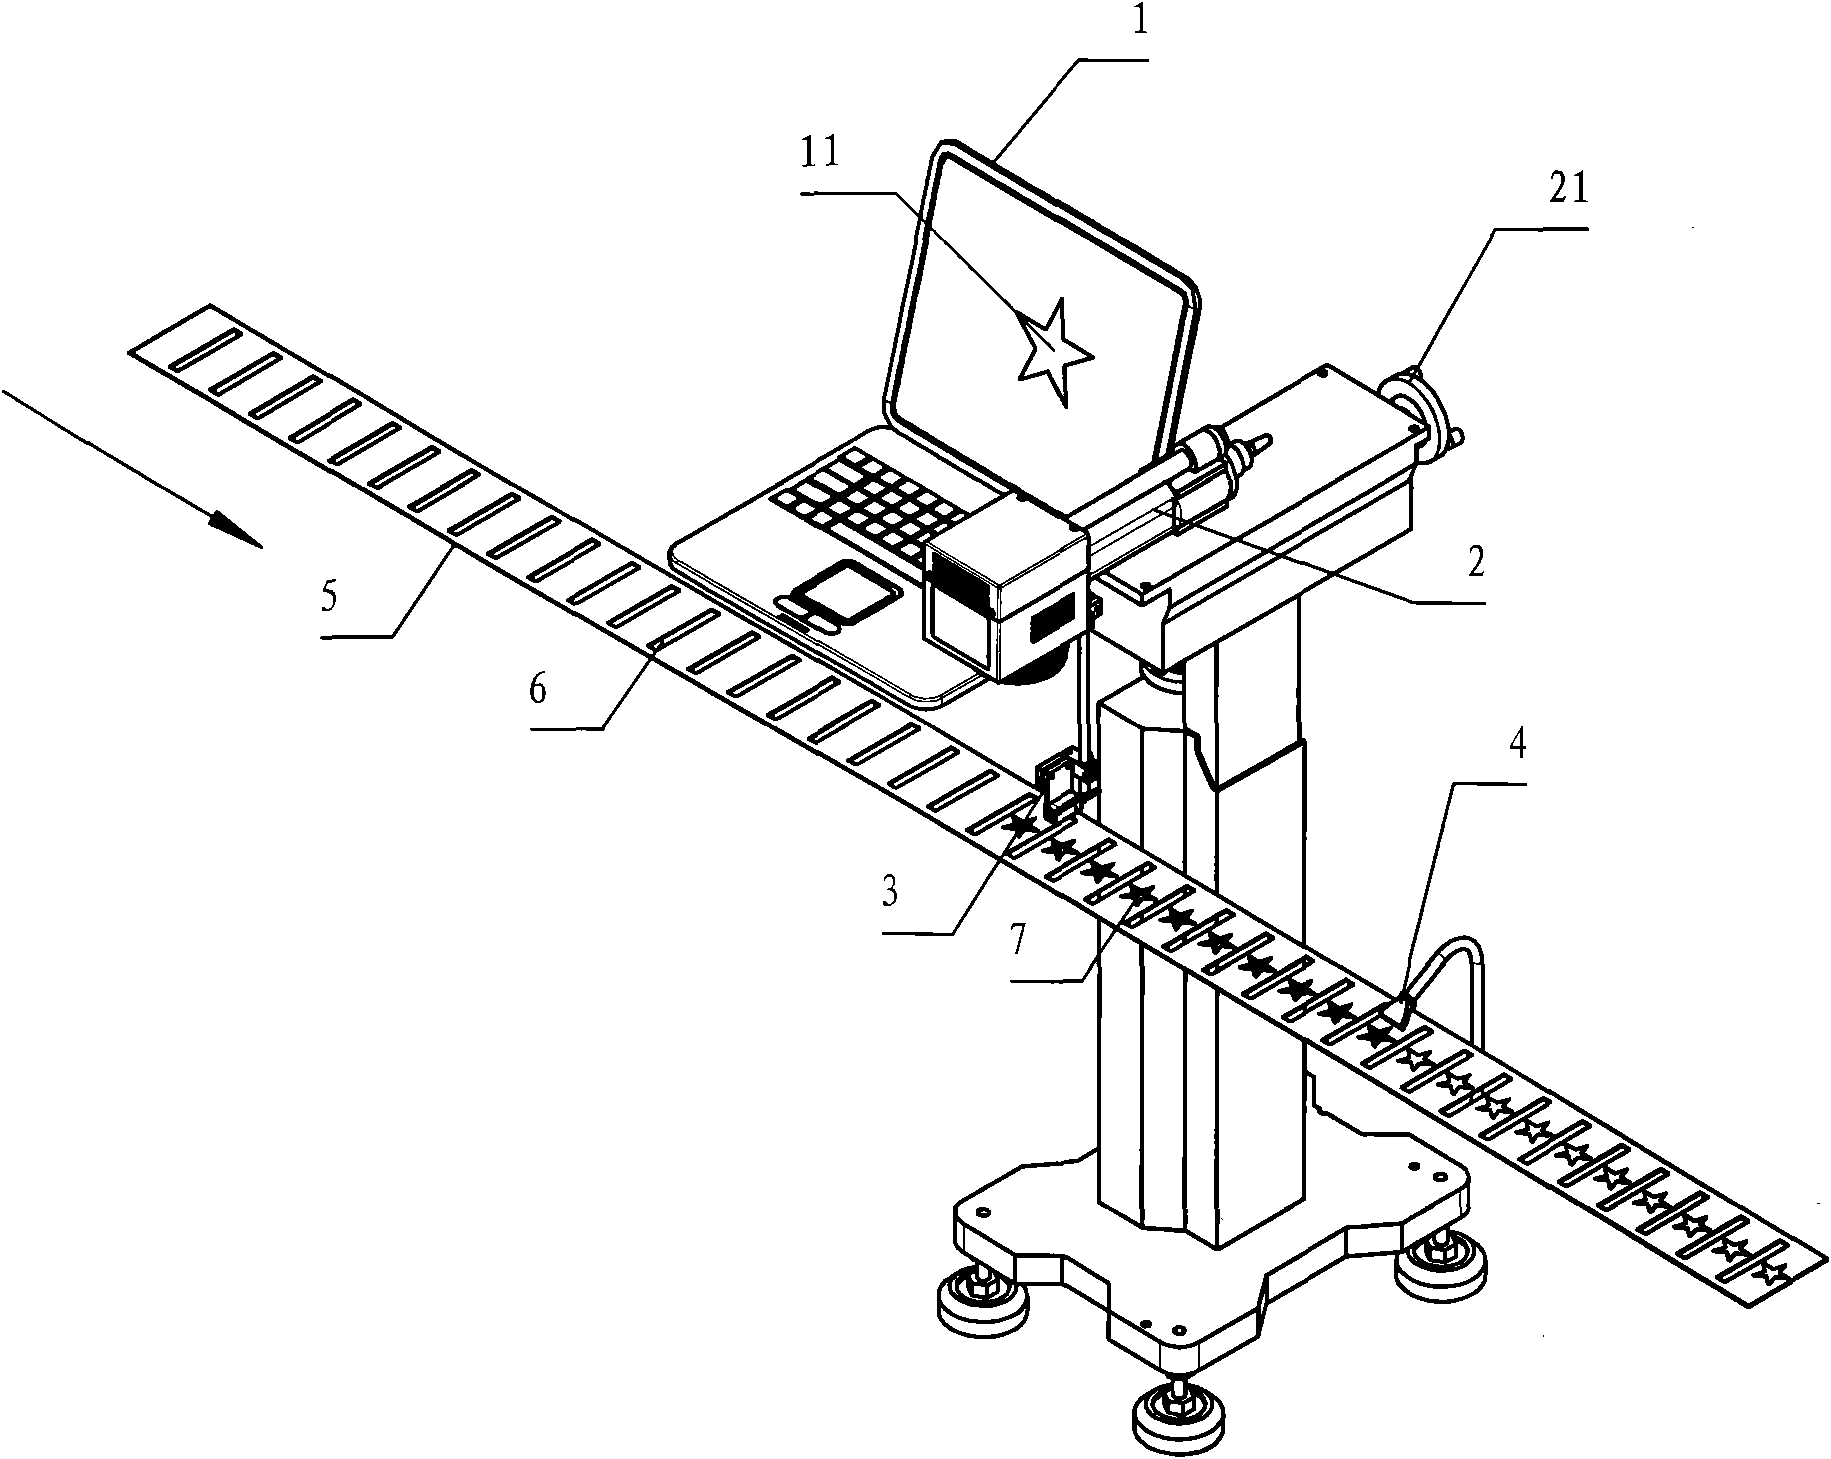 Laser paint-removing system and method